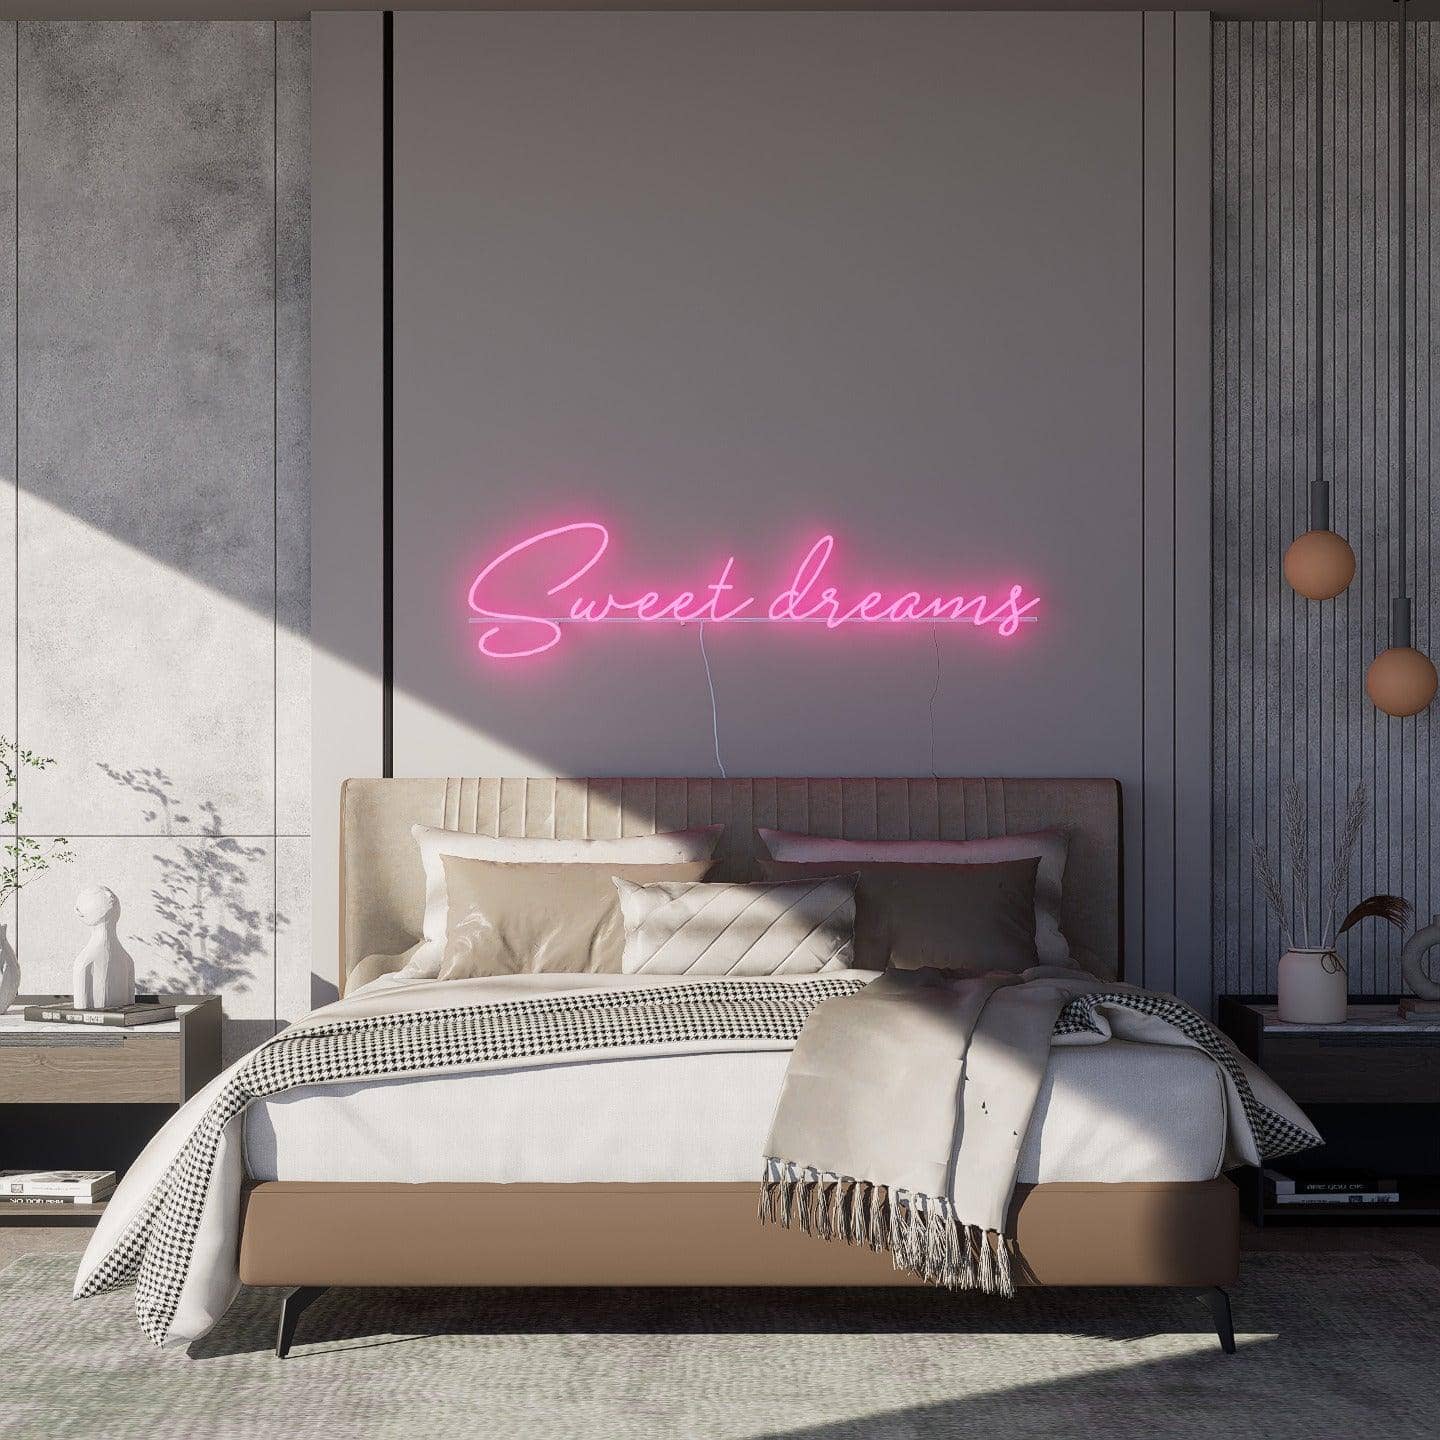 light-up-pink-neon-lights-during-the-day-and-hang-on-the-wall-for-display-sweet-dreams